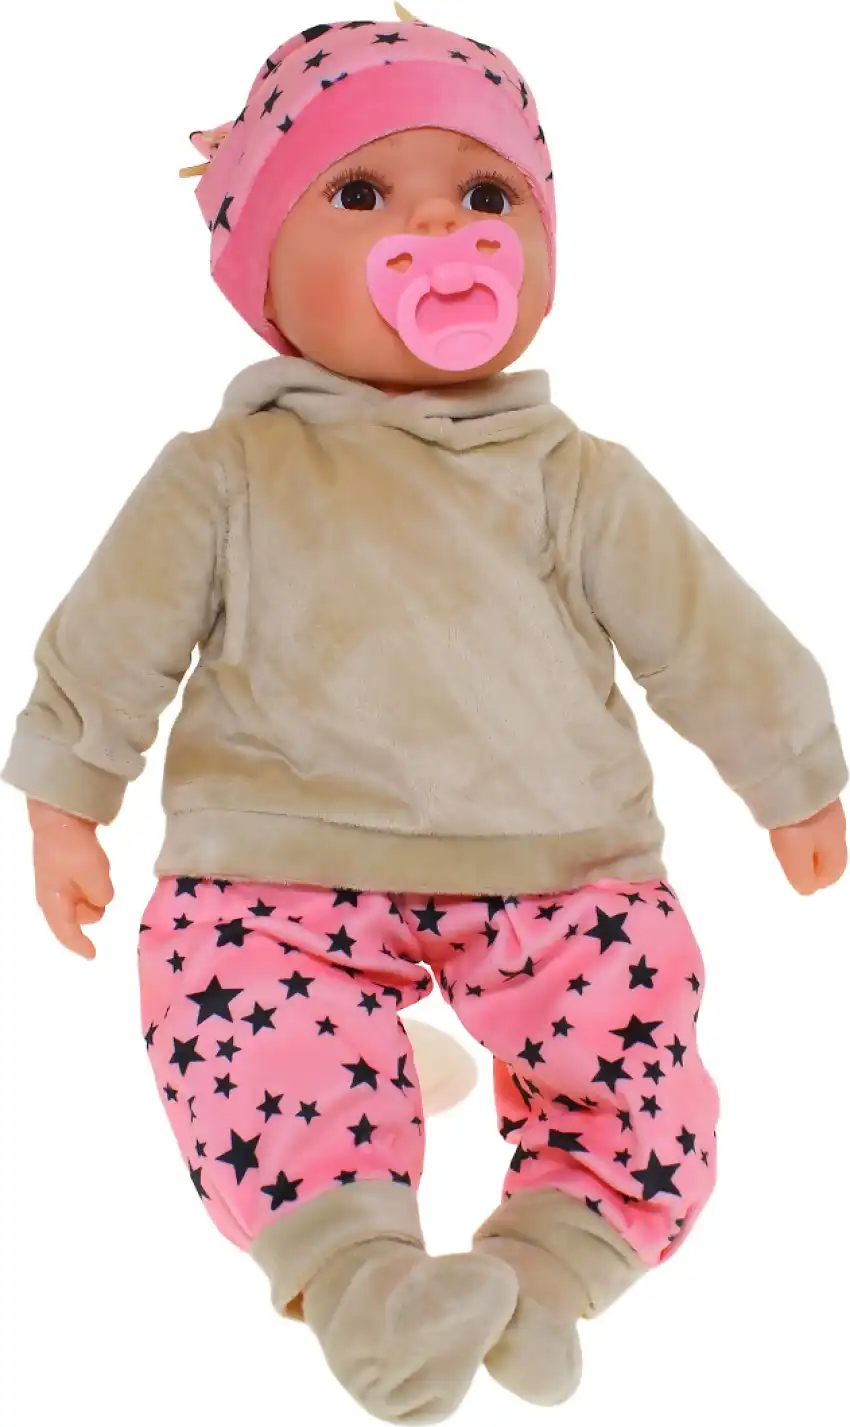 Cotton Candy - Baby Doll Amelia With Dummy - Pink Outfit With Stars